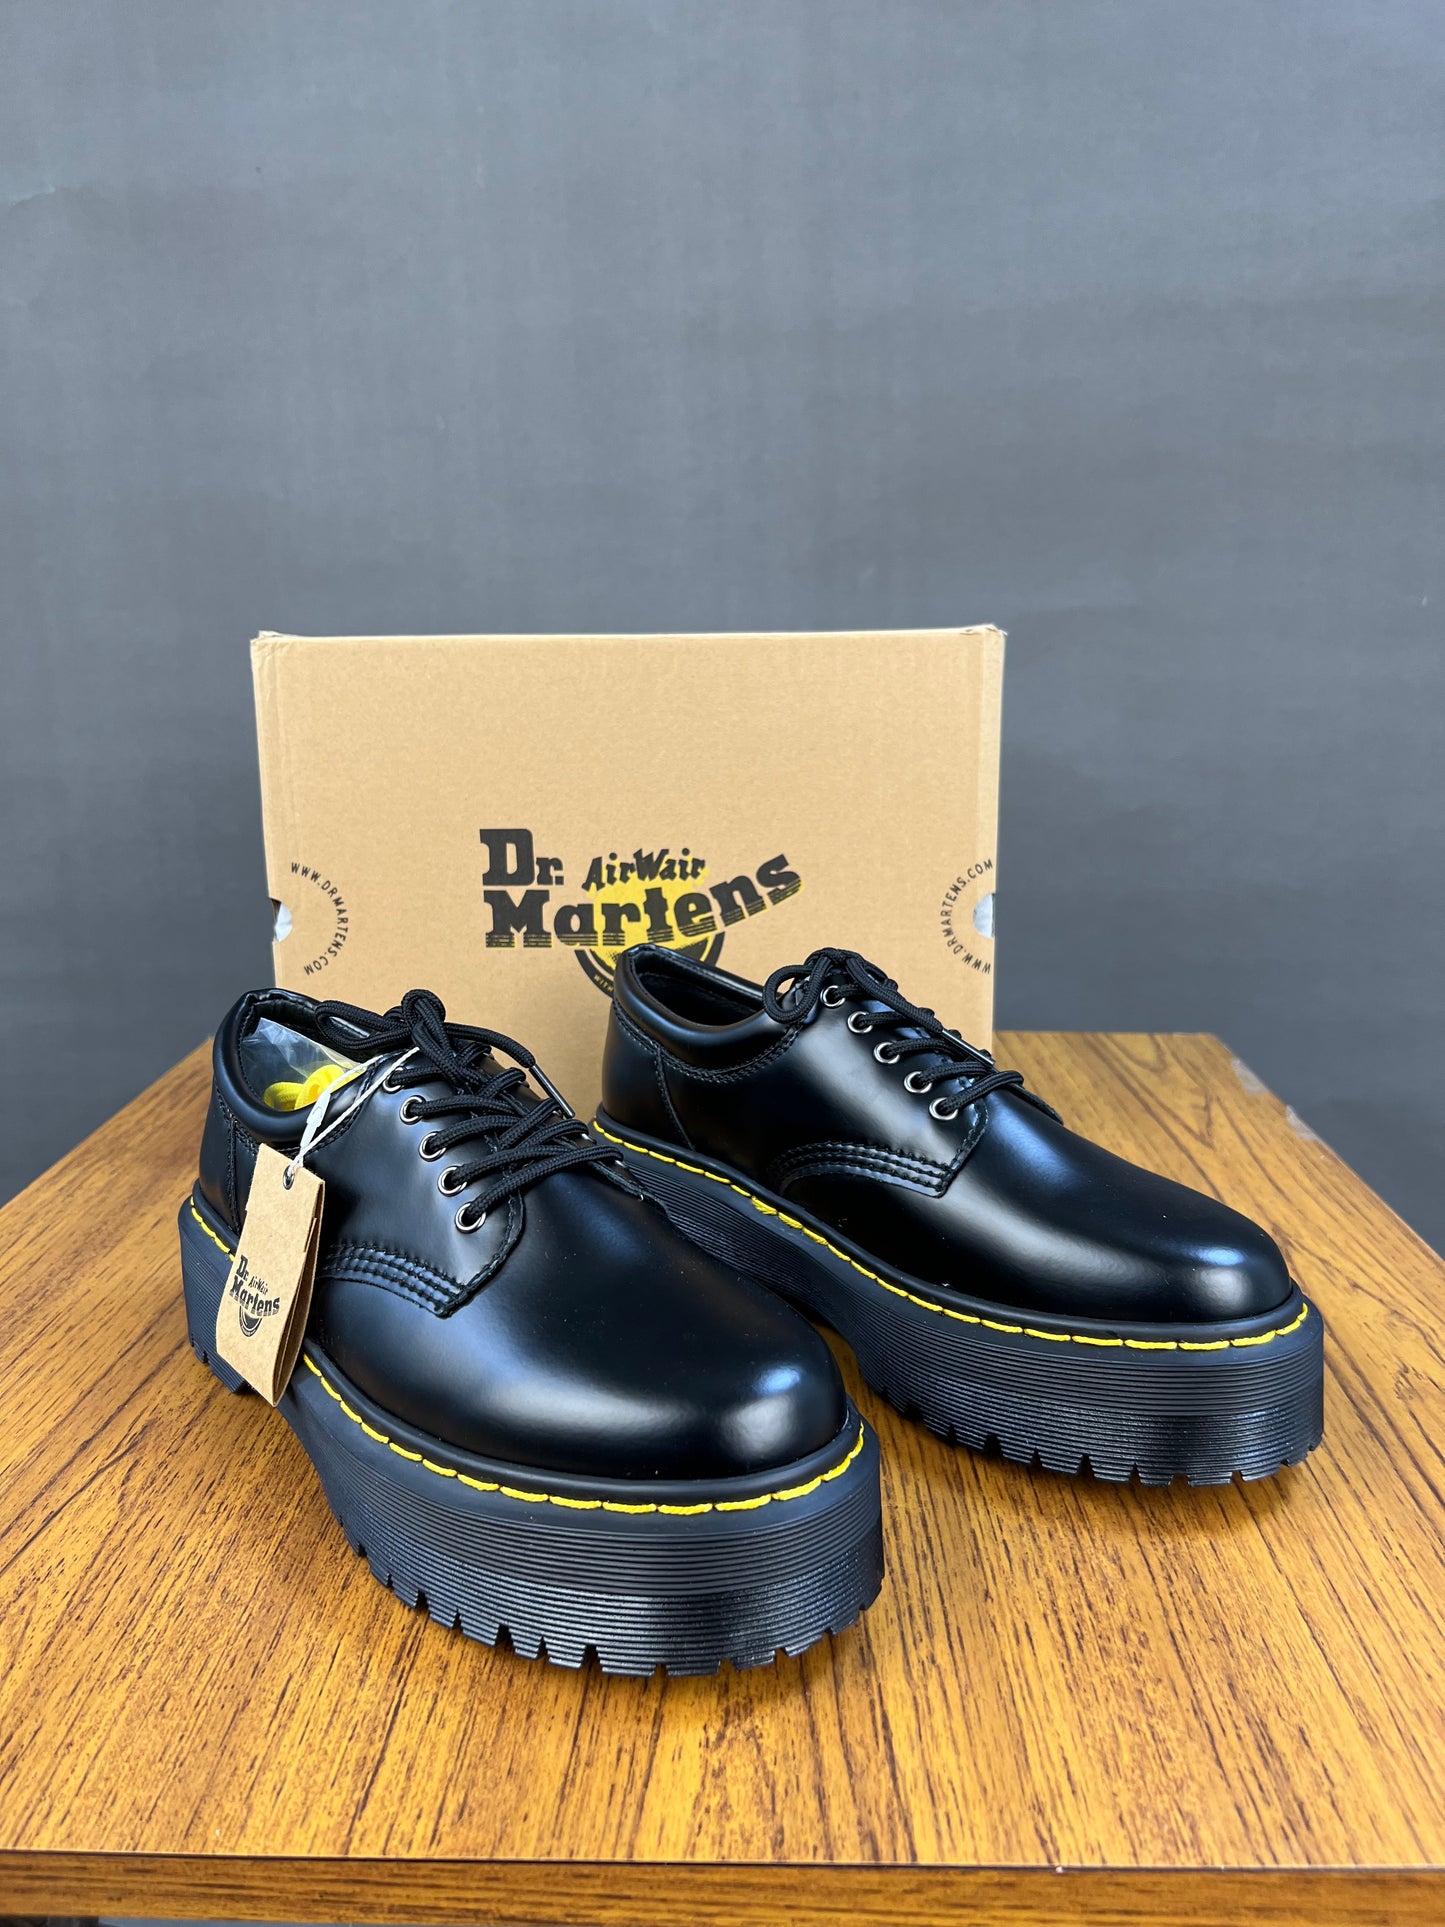 Dr MARTENS 1461 QUAD CLASSIC SHOE WITH YELLOW STITCHING